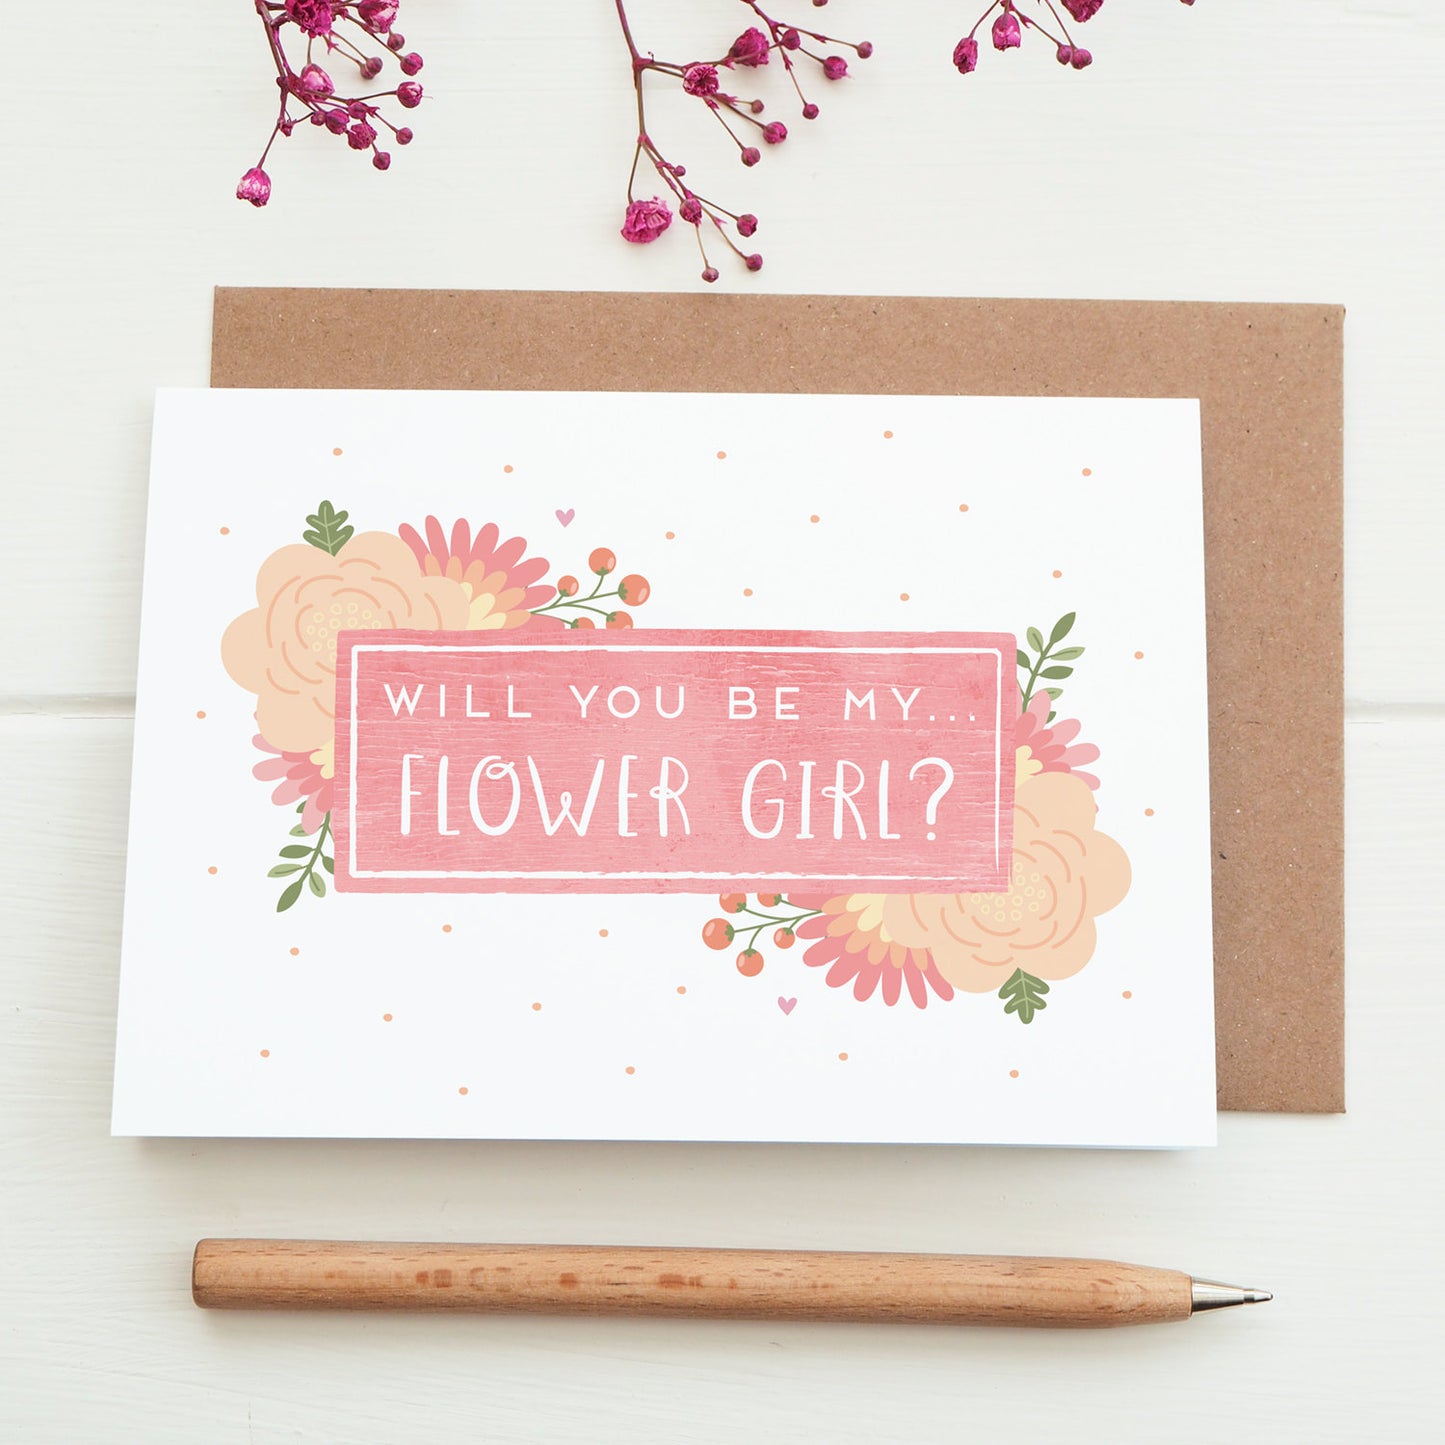 Will you be my flower girl card in pink